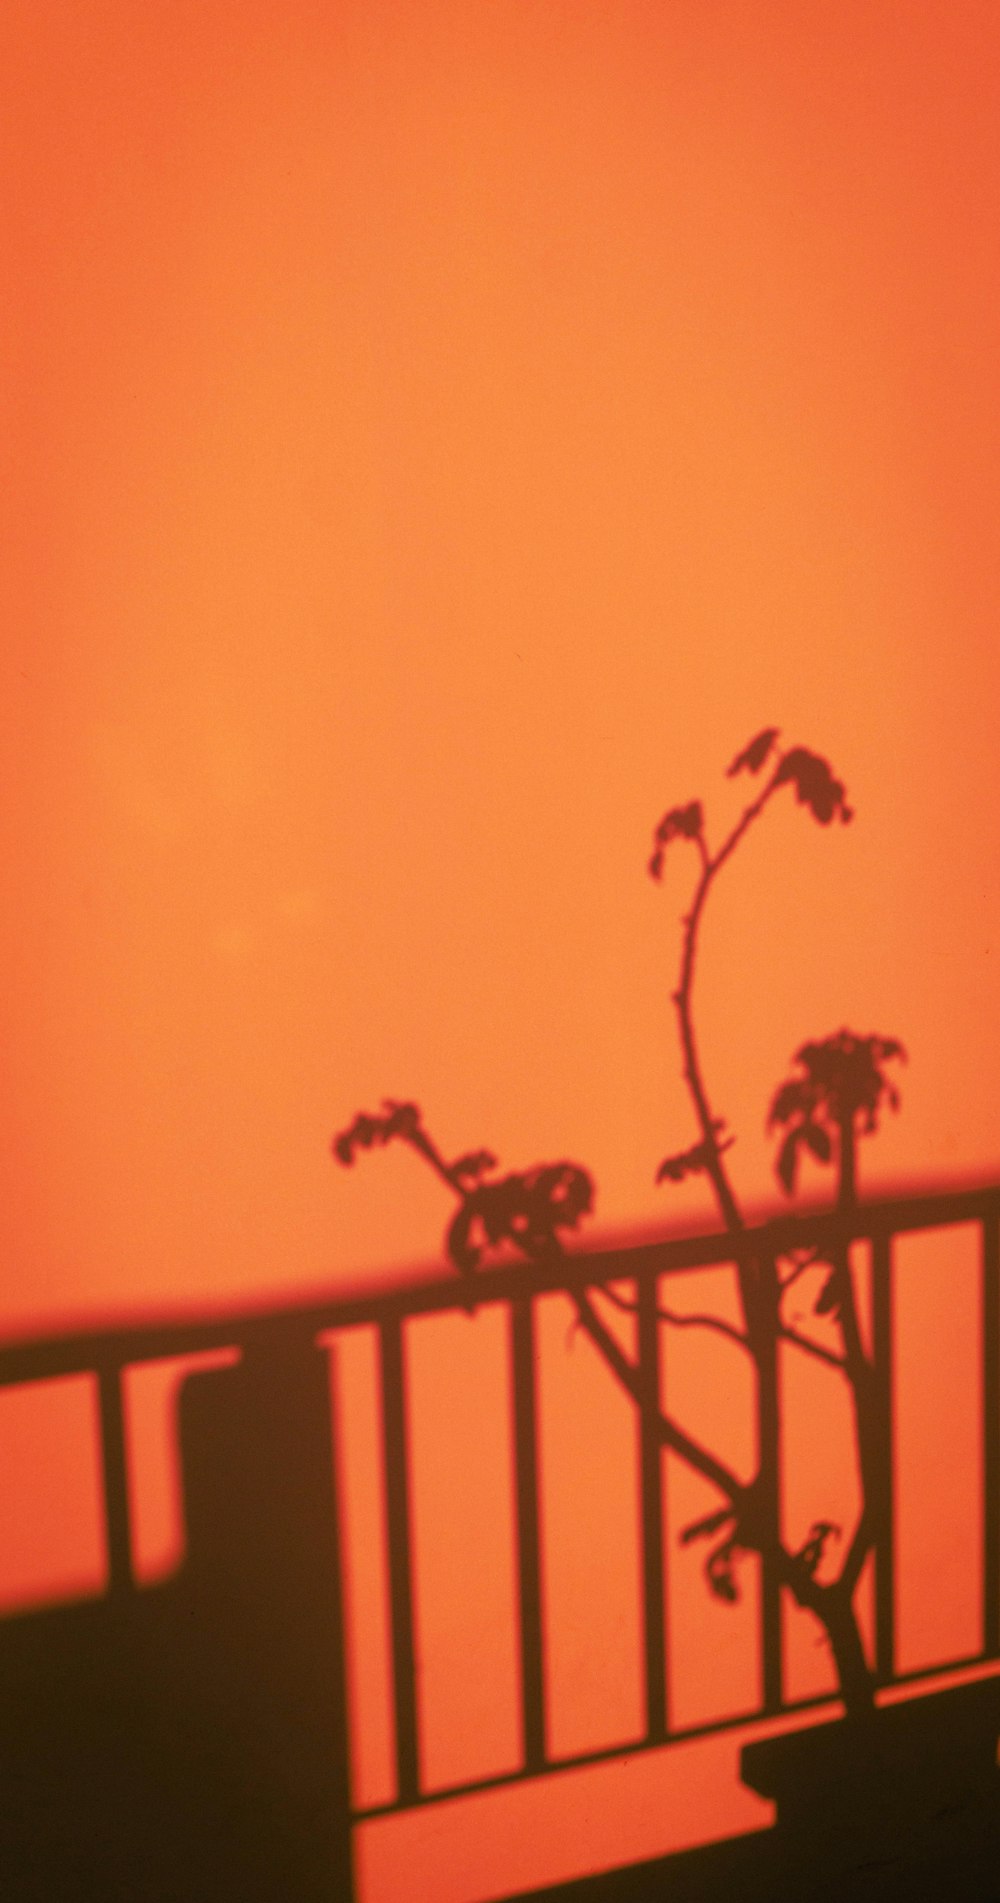 a silhouette of a plant